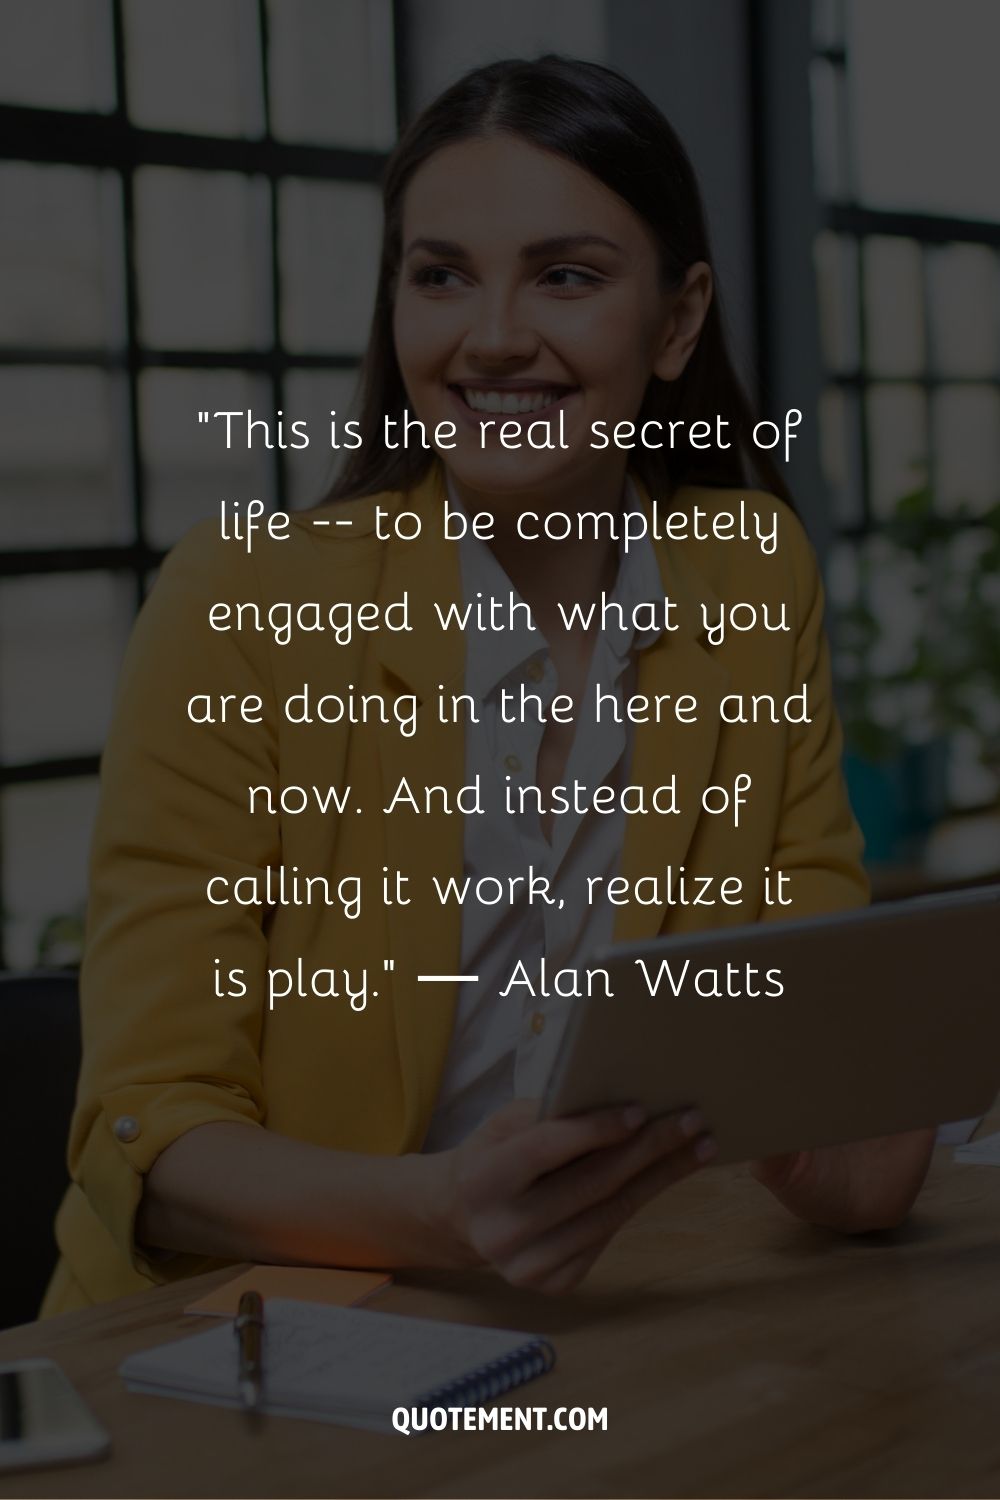 “This is the real secret of life -- to be completely engaged with what you are doing in the here and now. And instead of calling it work, realize it is play.” ― Alan Watts